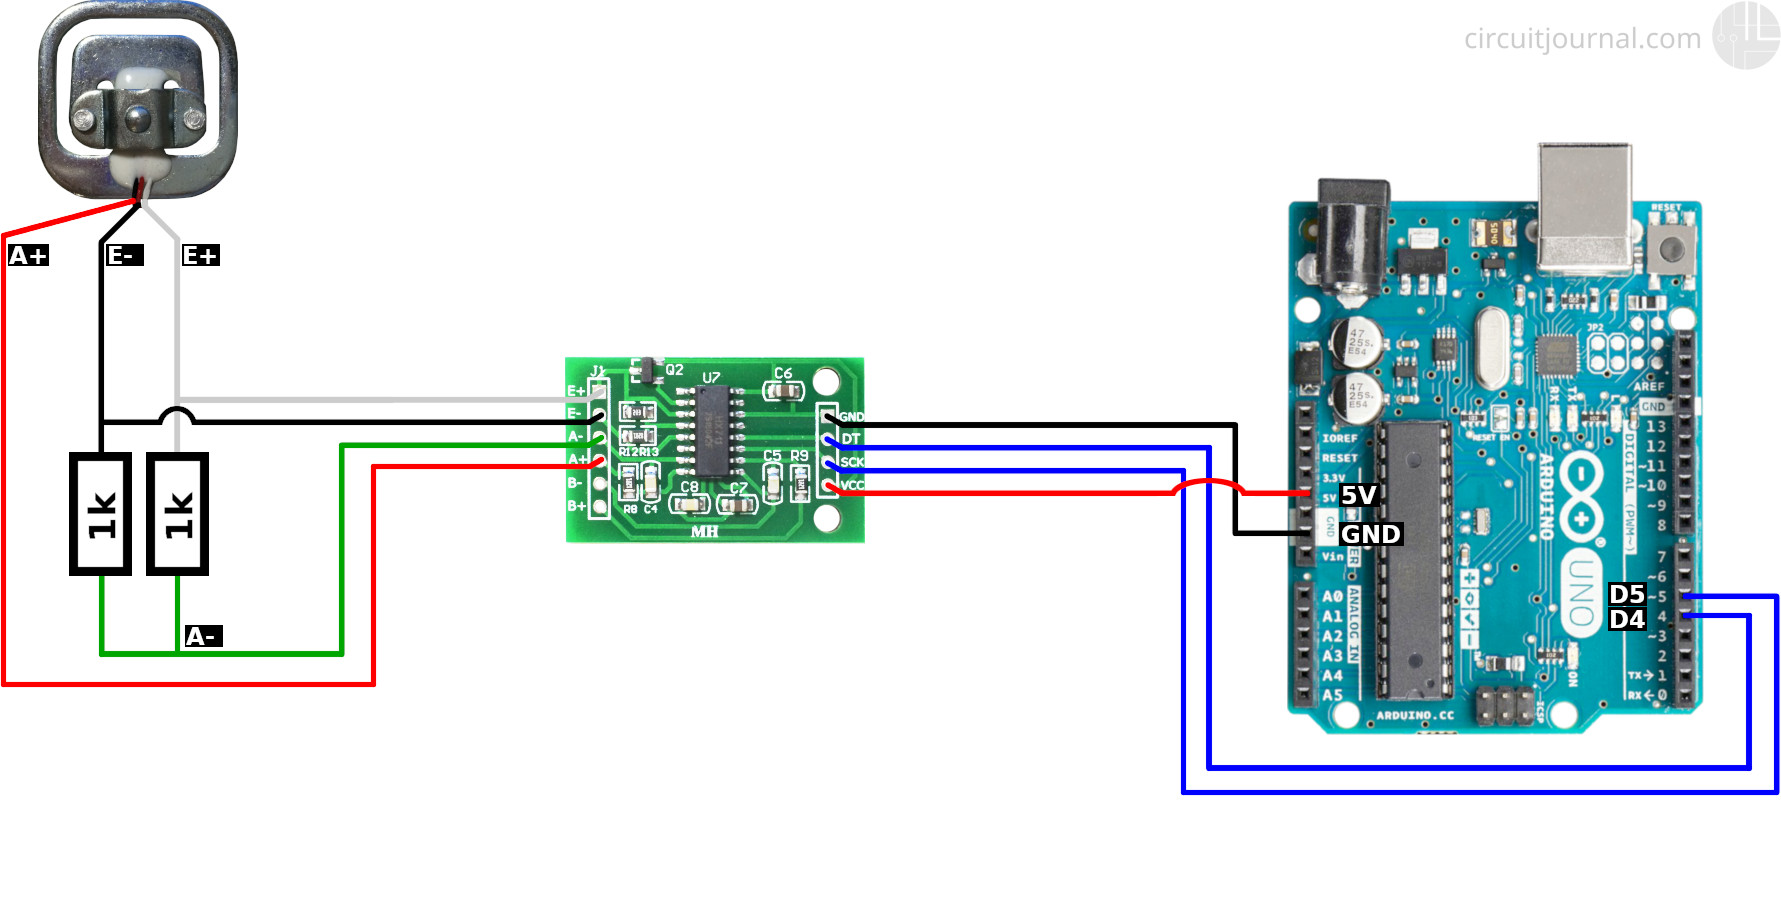 Connecting a single bathroom scale load cell module to Arduino with the HX711 module